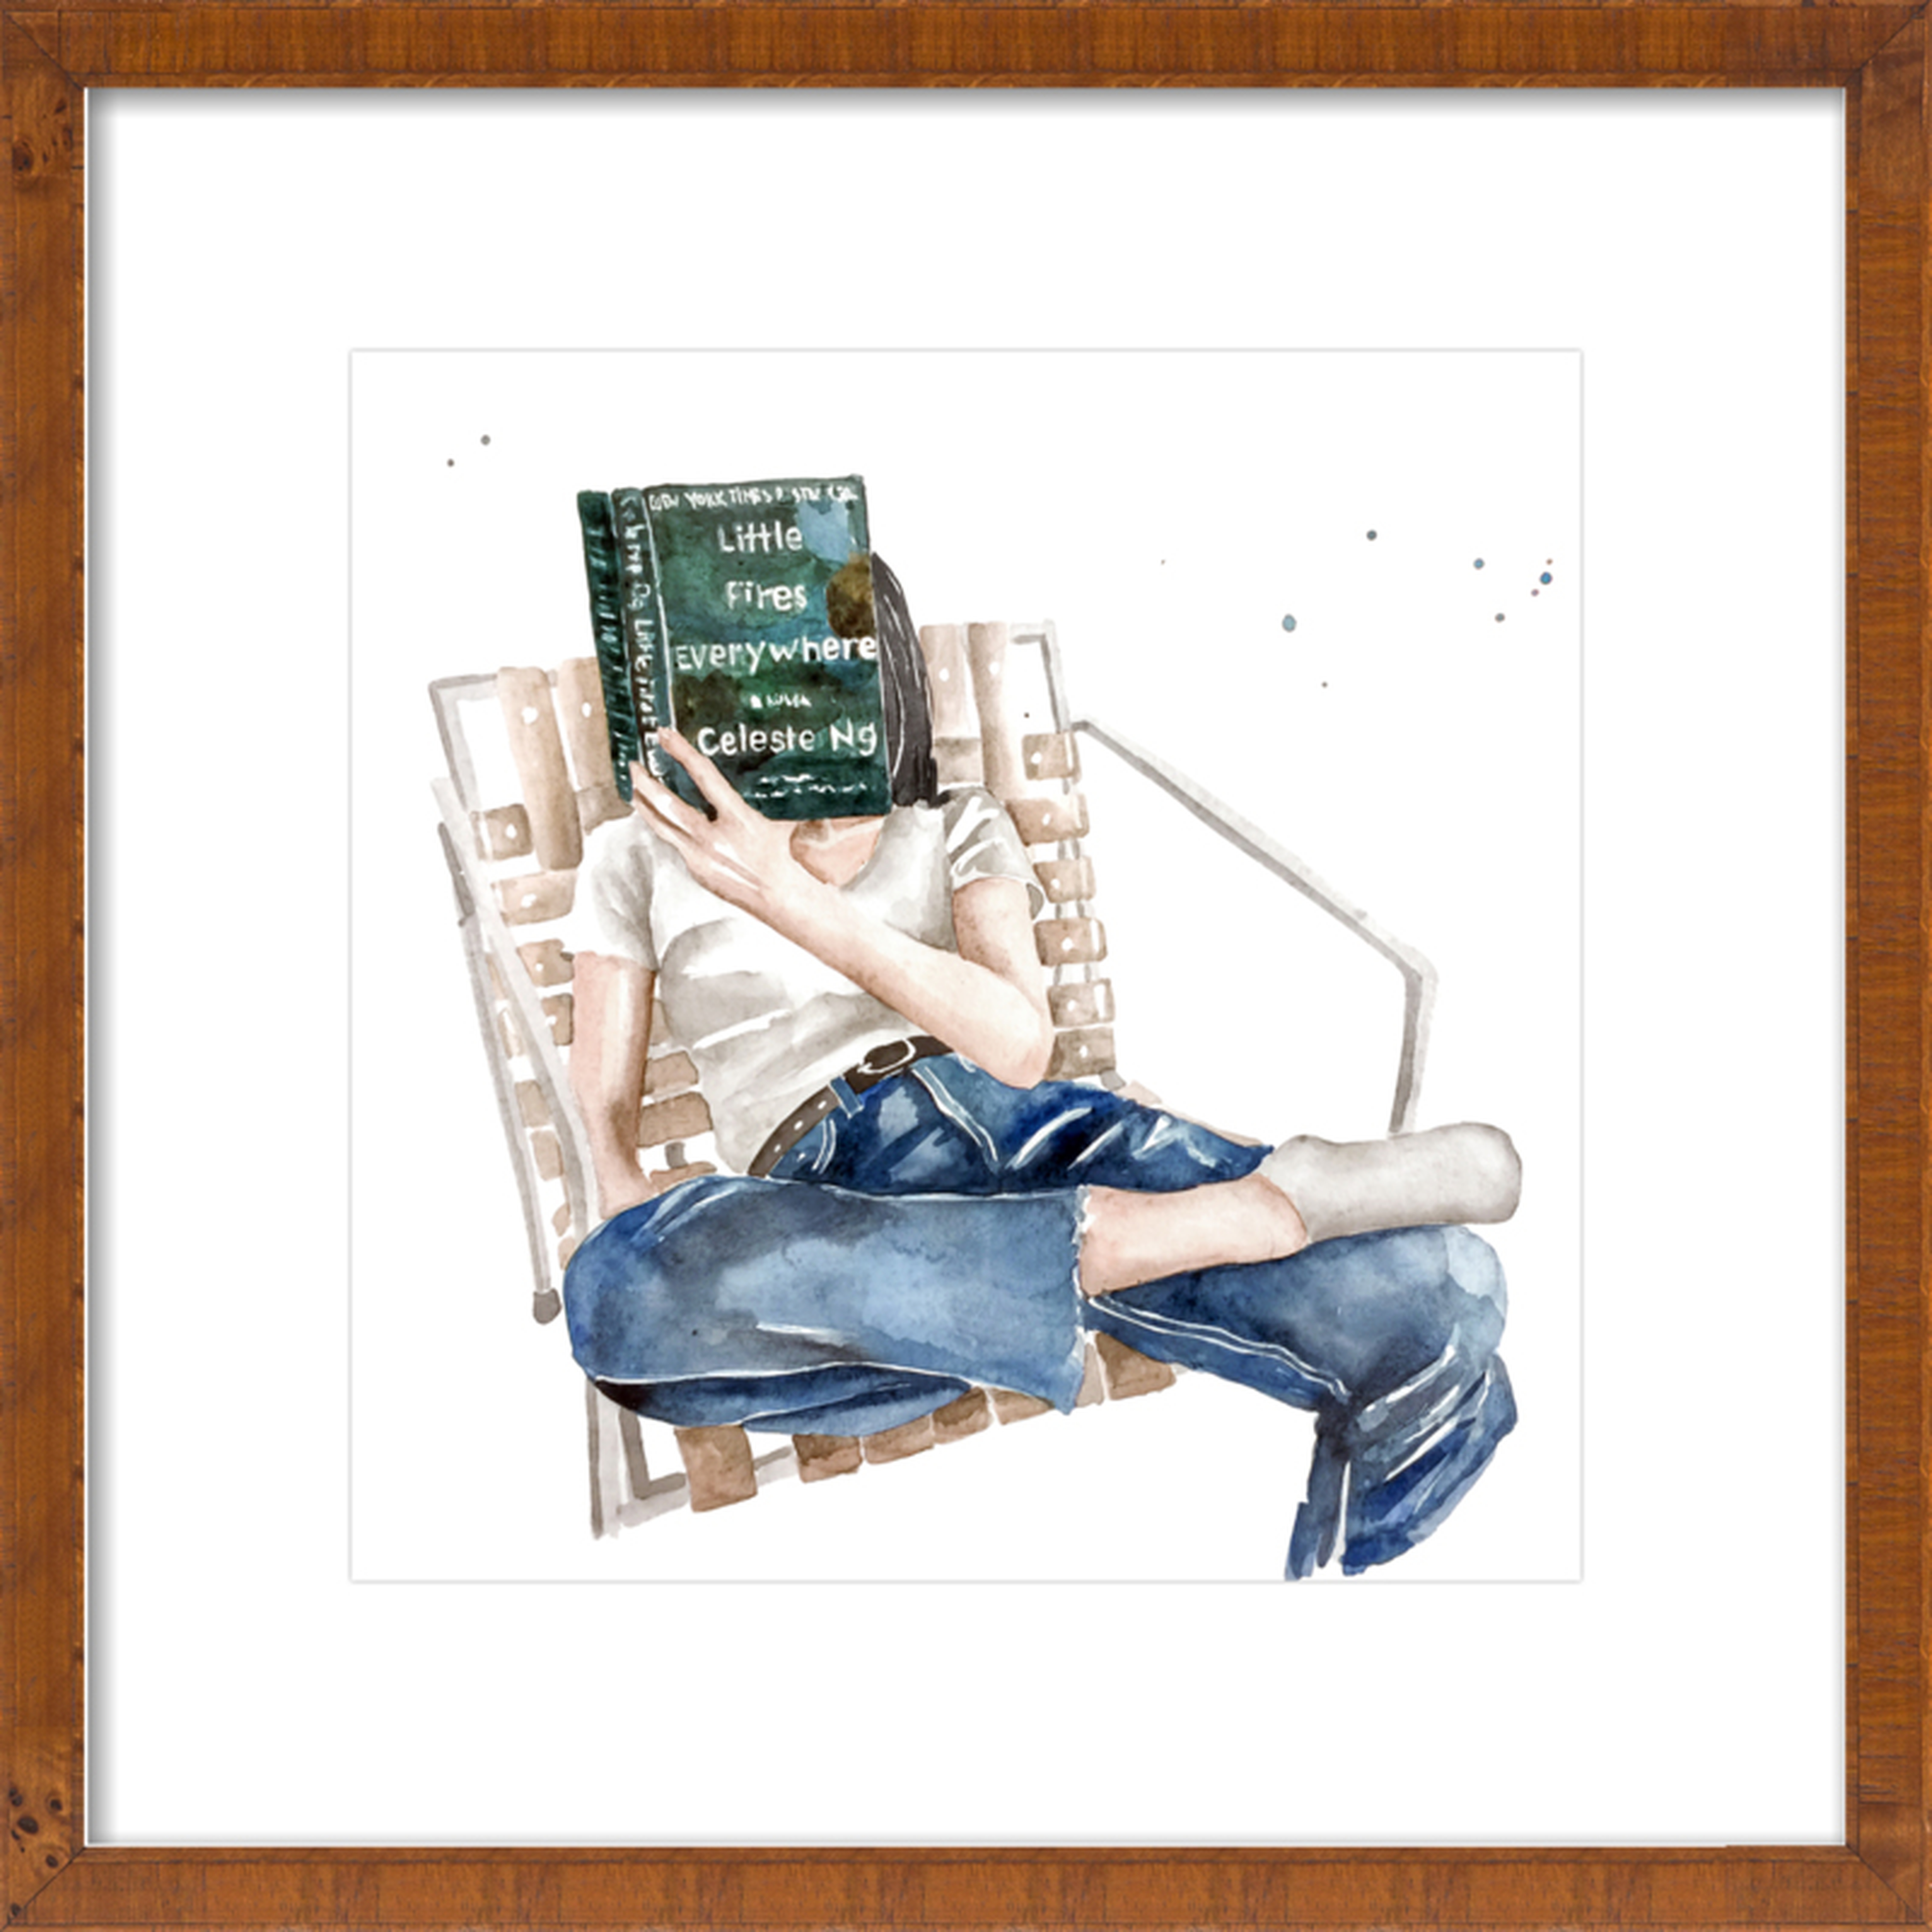 Woman Reading Book New York Times Bestseller Little Fires Everywhere by Celeste Ng, Print, 16" x 16" - Artfully Walls